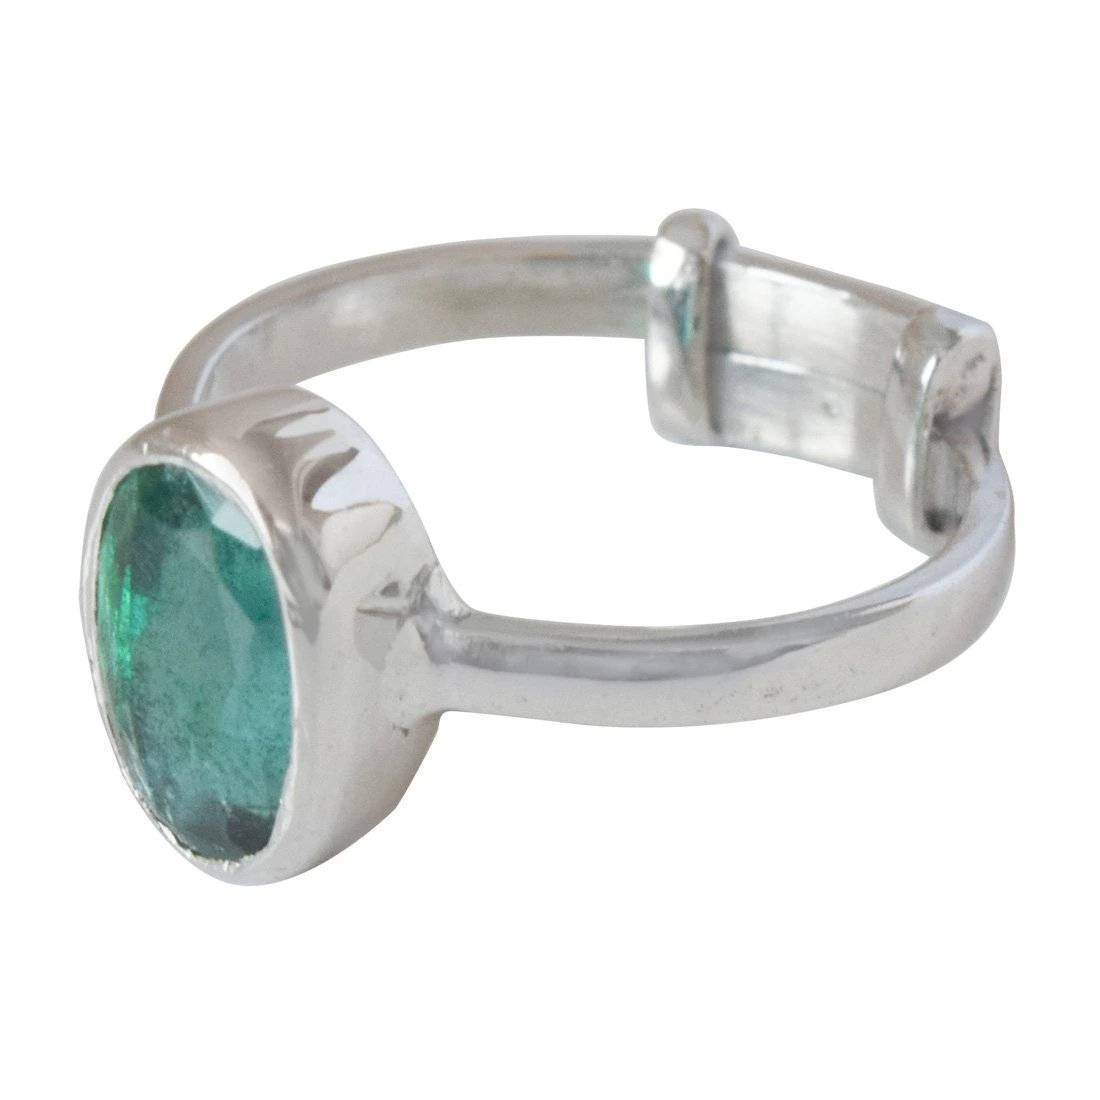 2.14cts AA Grade Green Oval Emerald and 925 Silver Adjustable Ring (GSR68)